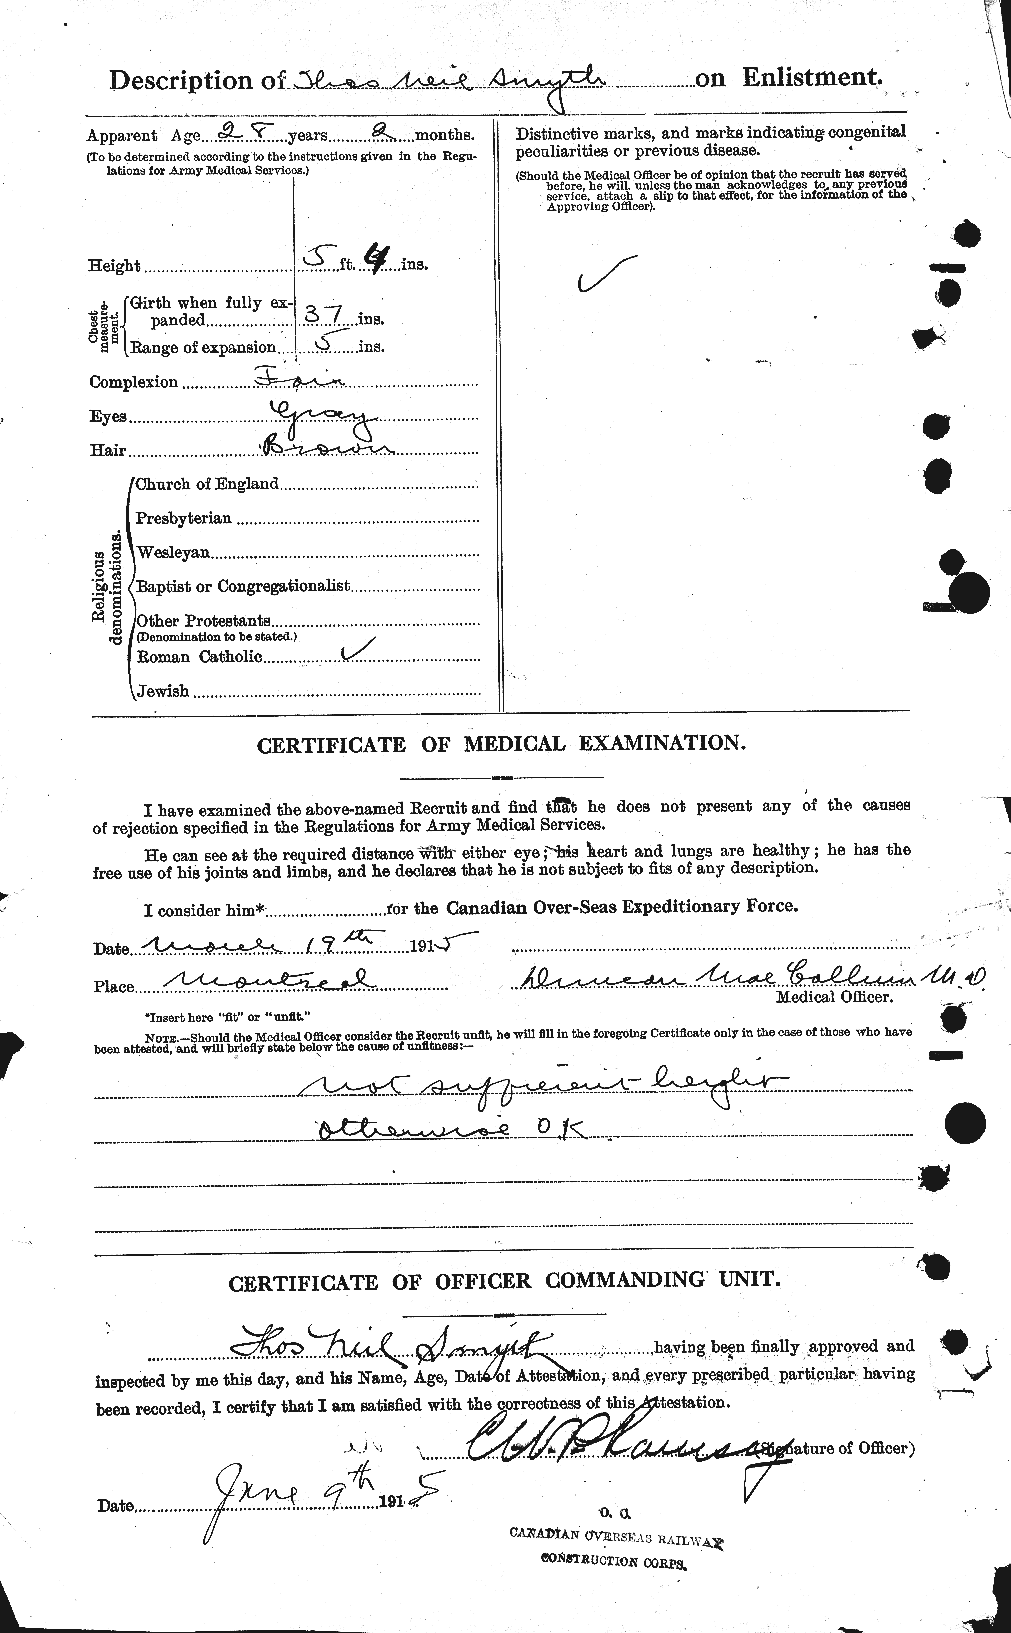 Personnel Records of the First World War - CEF 106058b